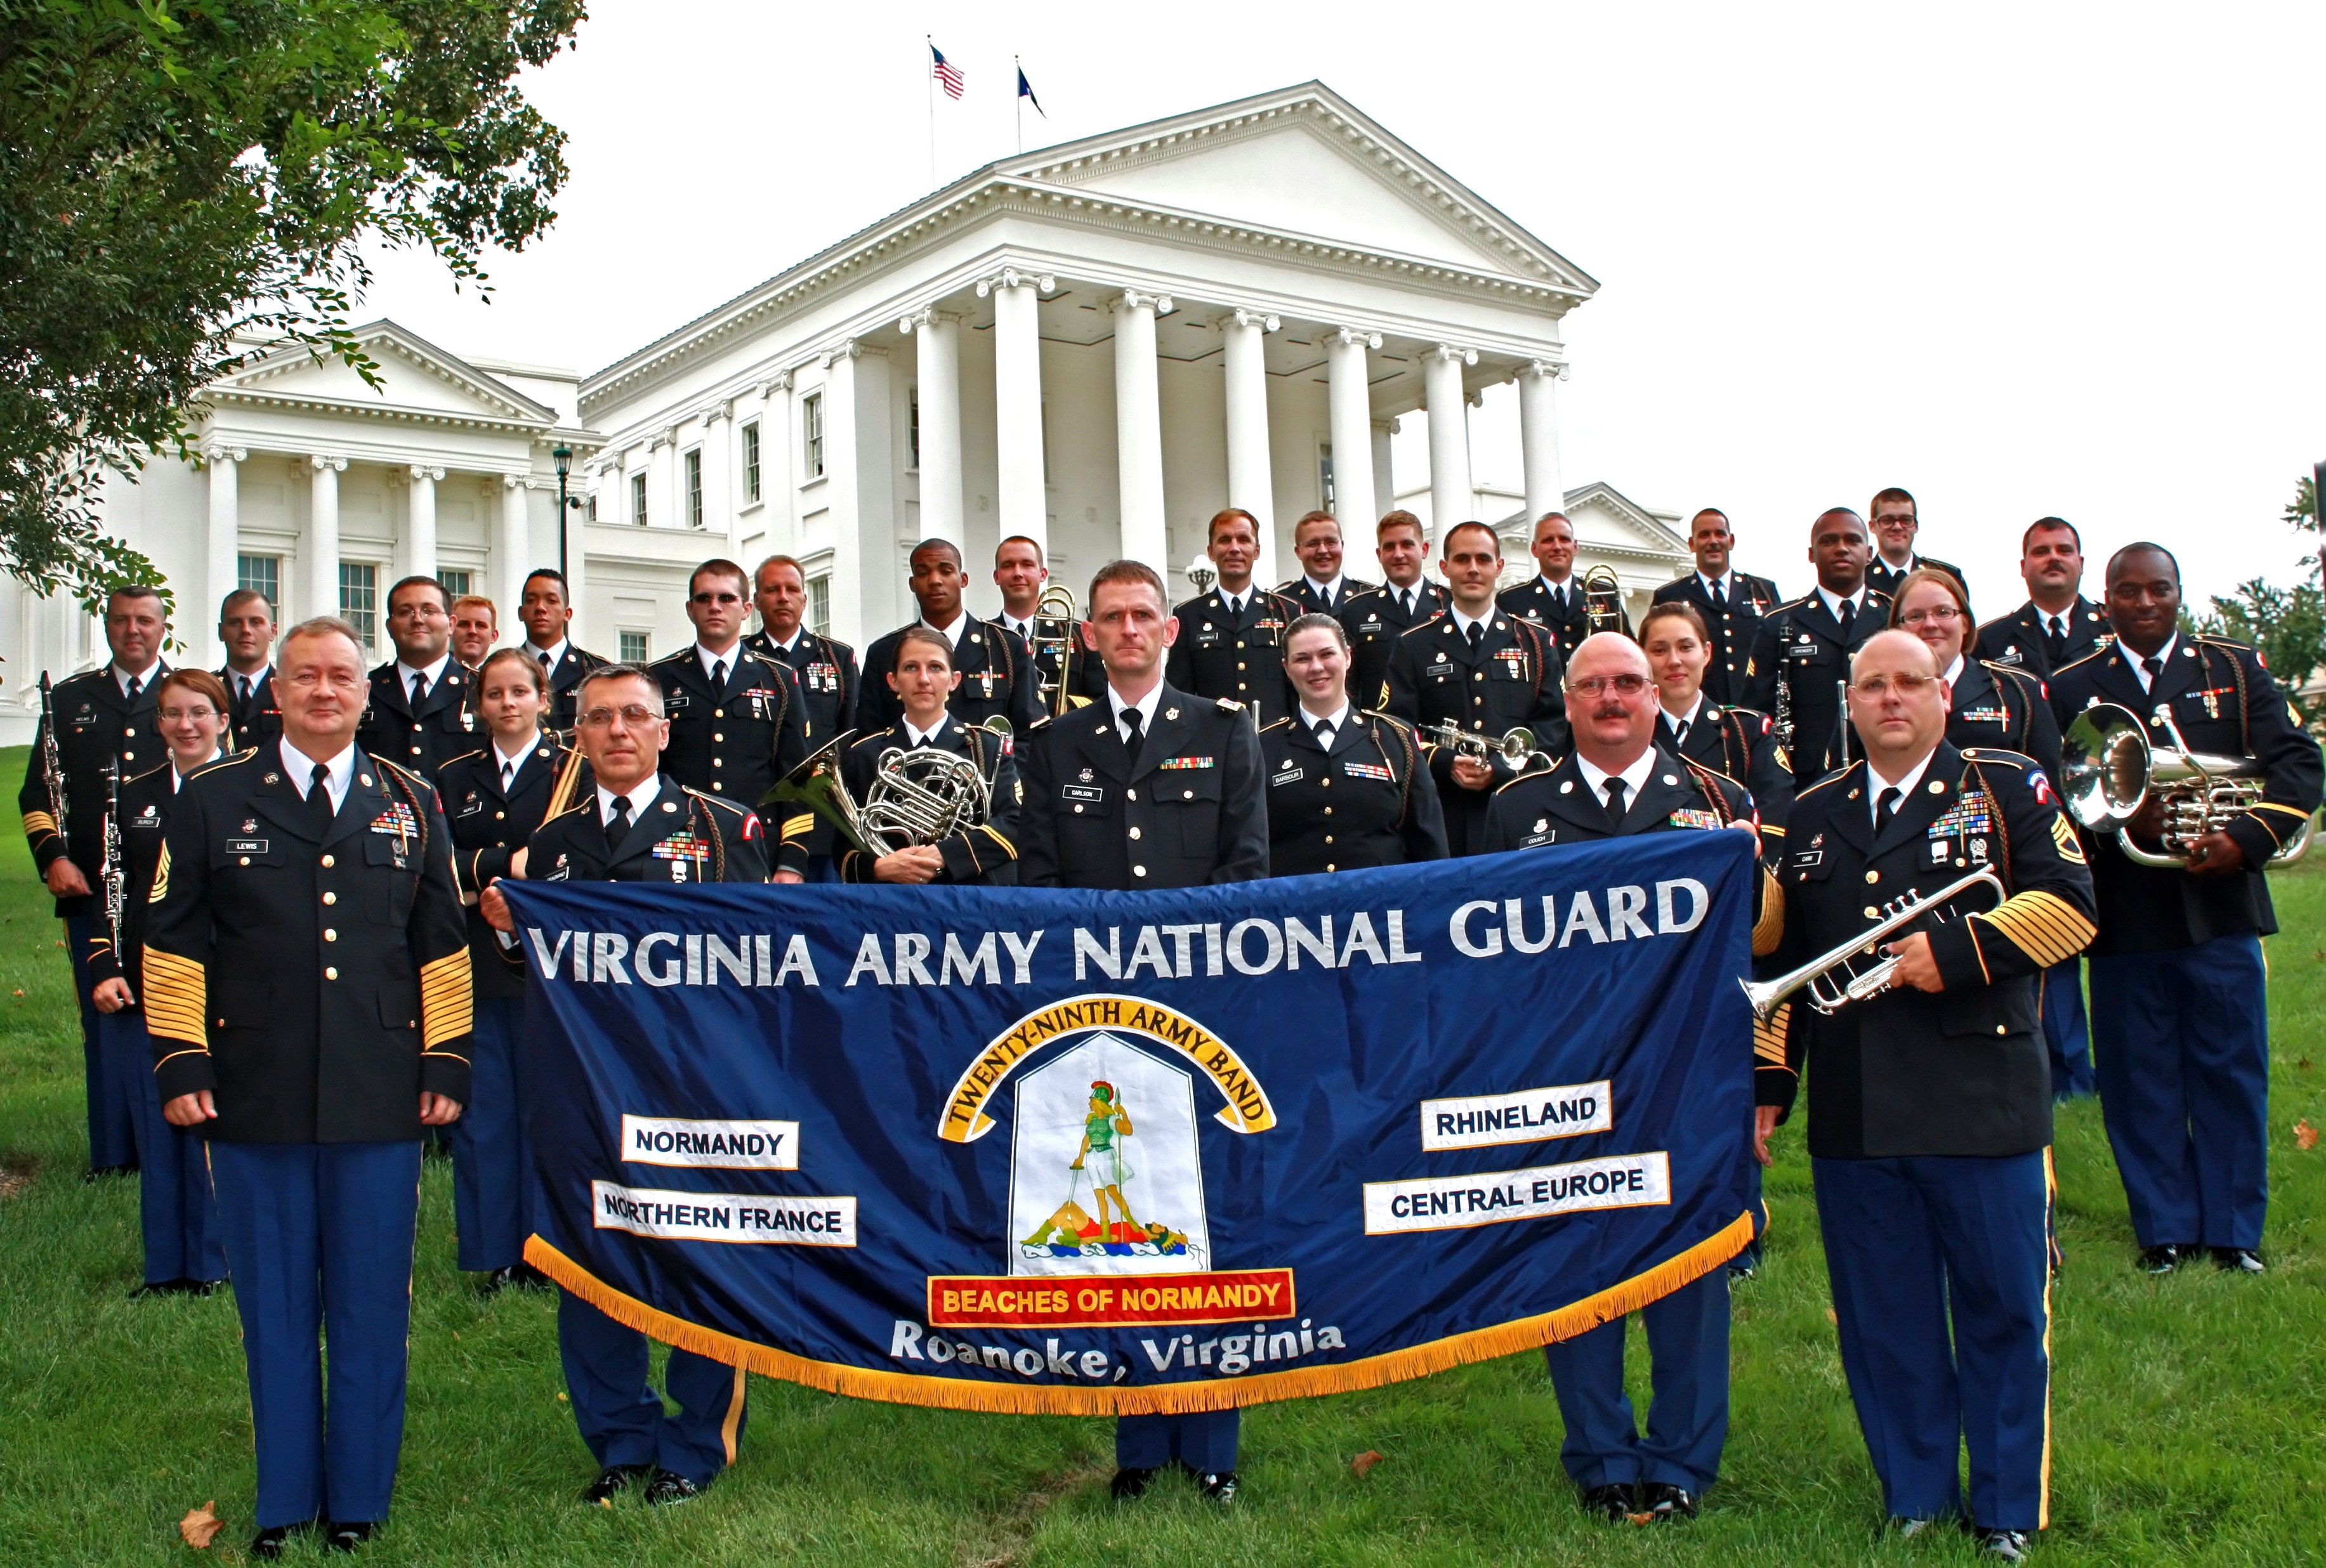 29th-Army-Band-State-Capitol-3a-modified.JPG